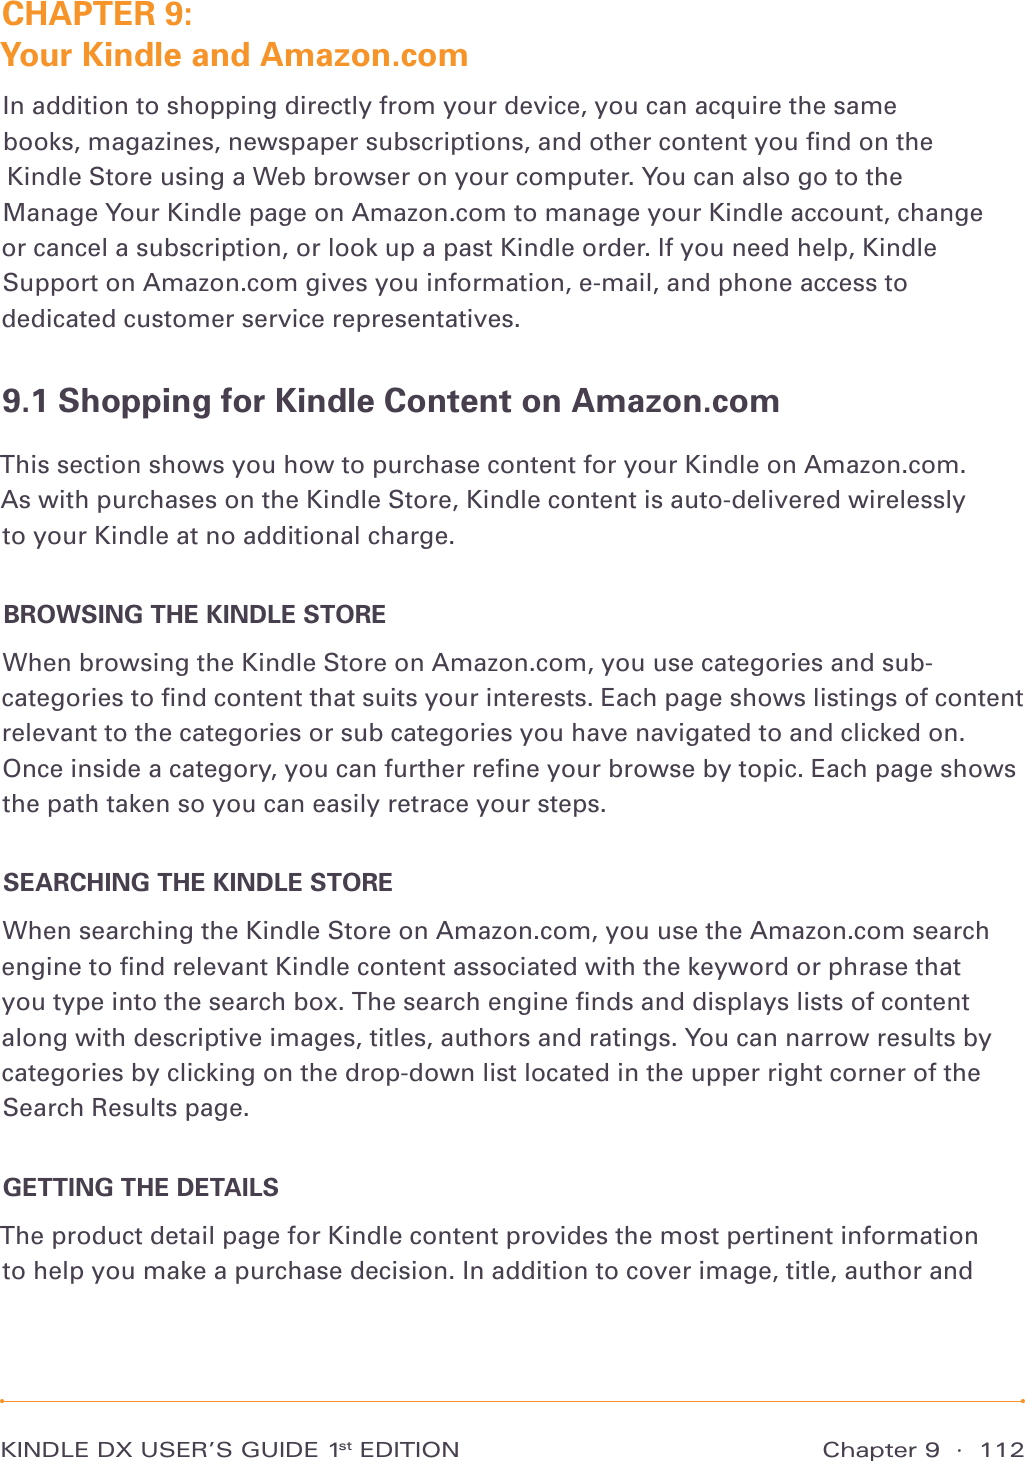 Chapter 9  ·  112KINDLE DX USER’S GUIDE 1st EDITIONCHAPTER 9:  Your Kindle and Amazon.comIn addition to shopping directly from your device, you can acquire the same books, magazines, newspaper subscriptions, and other content you ﬁnd on the  Kindle Store using a Web browser on your computer. You can also go to the  Manage Your Kindle page on Amazon.com to manage your Kindle account, change  or cancel a subscription, or look up a past Kindle order. If you need help, Kindle Support on Amazon.com gives you information, e-mail, and phone access to dedicated customer service representatives.9.1 Shopping for Kindle Content on Amazon.comThis section shows you how to purchase content for your Kindle on Amazon.com.  As with purchases on the Kindle Store, Kindle content is auto-delivered wirelessly  to your Kindle at no additional charge.BROWSING THE KINDLE STOREWhen browsing the Kindle Store on Amazon.com, you use categories and sub-categories to ﬁnd content that suits your interests. Each page shows listings of content relevant to the categories or sub categories you have navigated to and clicked on. Once inside a category, you can further reﬁne your browse by topic. Each page shows the path taken so you can easily retrace your steps.SEARCHING THE KINDLE STOREWhen searching the Kindle Store on Amazon.com, you use the Amazon.com search engine to ﬁnd relevant Kindle content associated with the keyword or phrase that you type into the search box. The search engine ﬁnds and displays lists of content along with descriptive images, titles, authors and ratings. You can narrow results by categories by clicking on the drop-down list located in the upper right corner of the Search Results page.GETTING THE DETAILSThe product detail page for Kindle content provides the most pertinent information to help you make a purchase decision. In addition to cover image, title, author and 